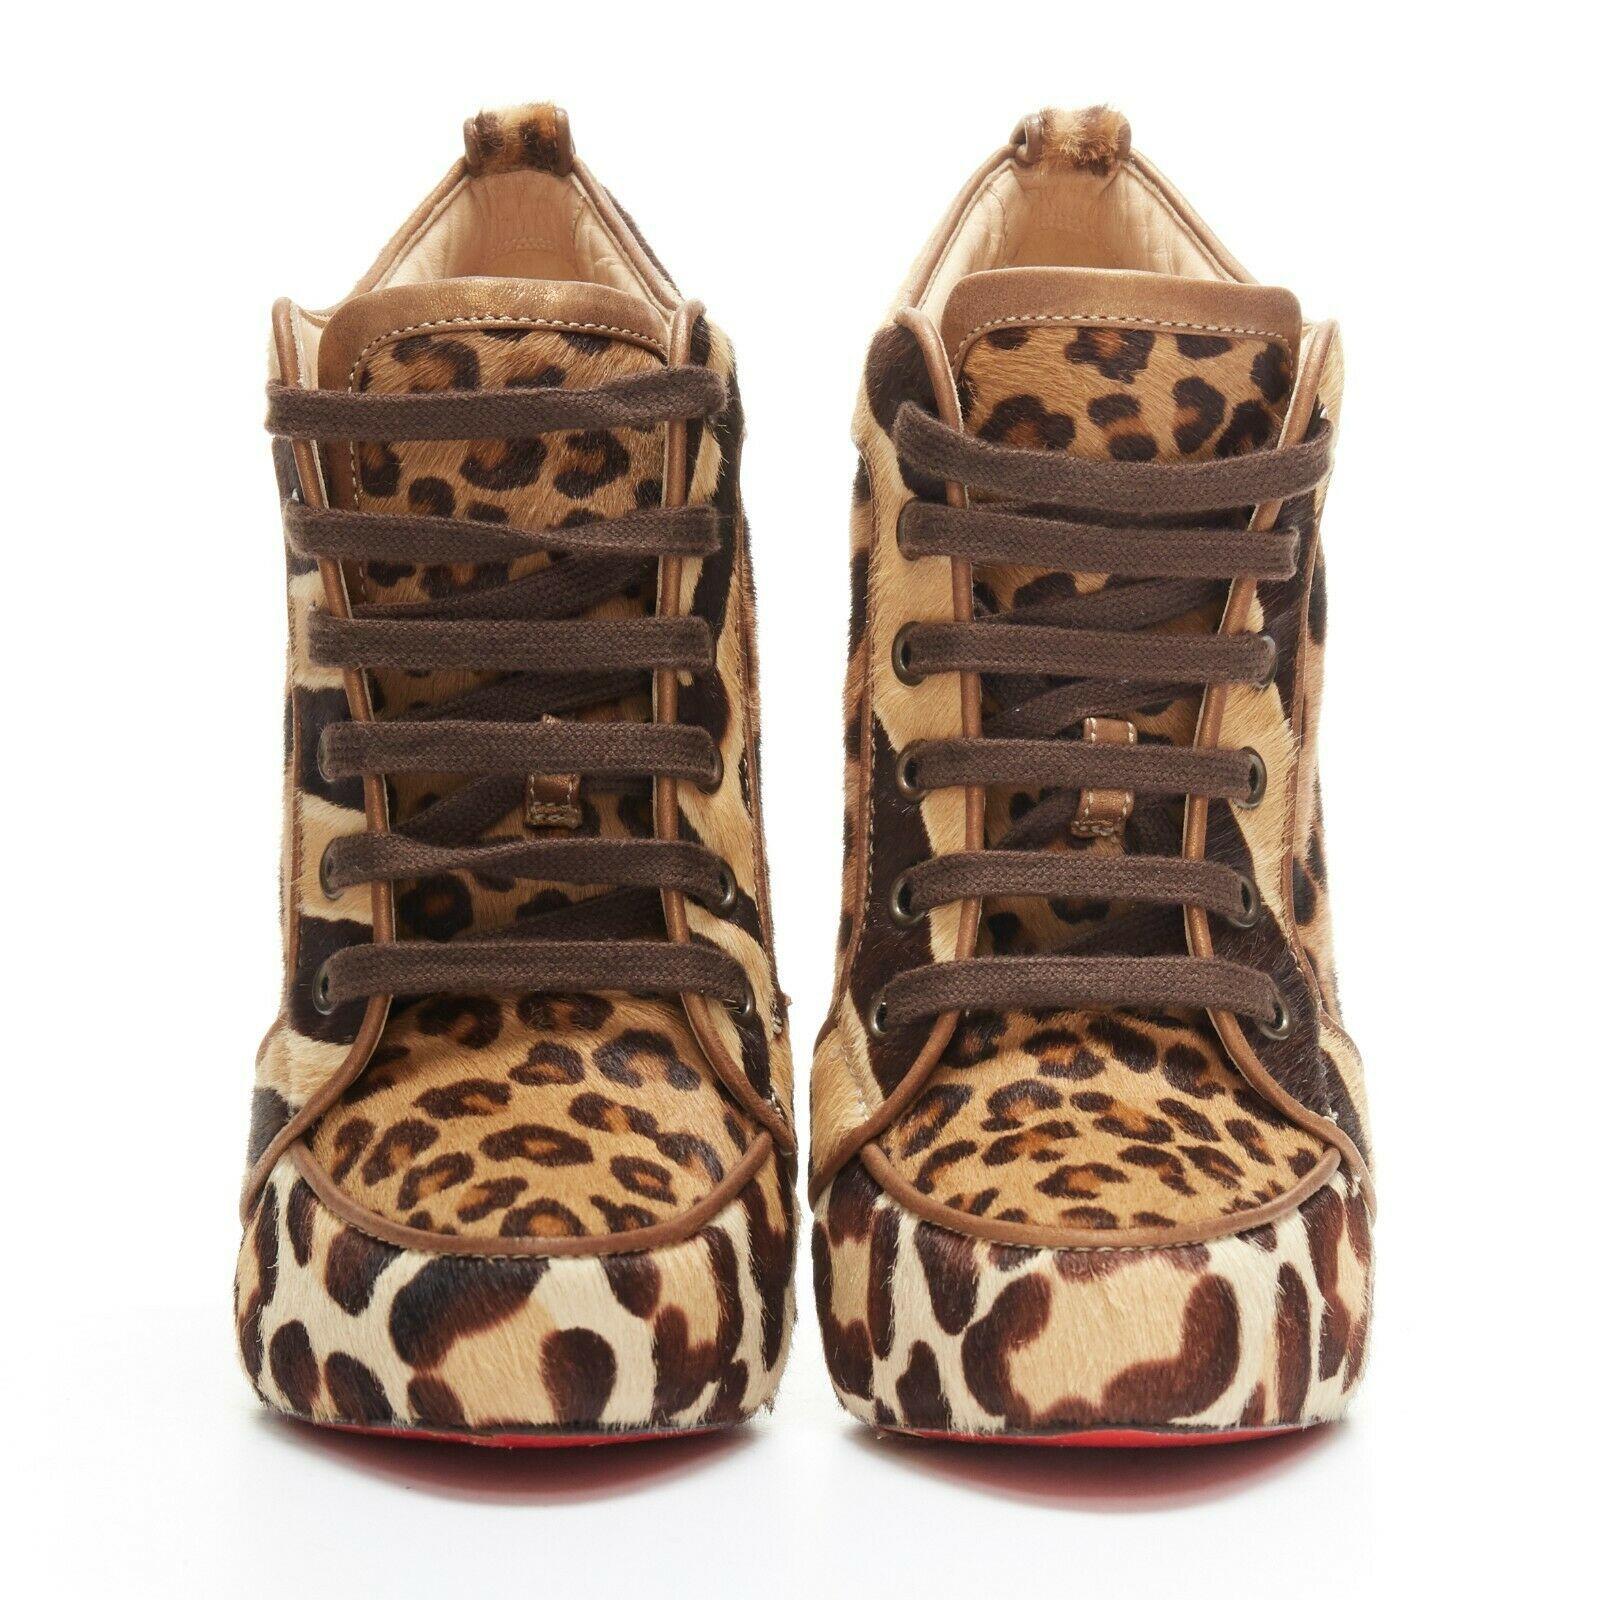 CHRISTIAN LOUBOUTIN Venus Orlato 140 leopard pony hair laced booties EU39.5
CHRISTIAN LOUBOUTIN
Venus Orlato 140. Leopard printed pony hair. 
Almond toe. Concealed platform sole. Copper leather piping. 
Gold logo Badge on the inner side of shoe.